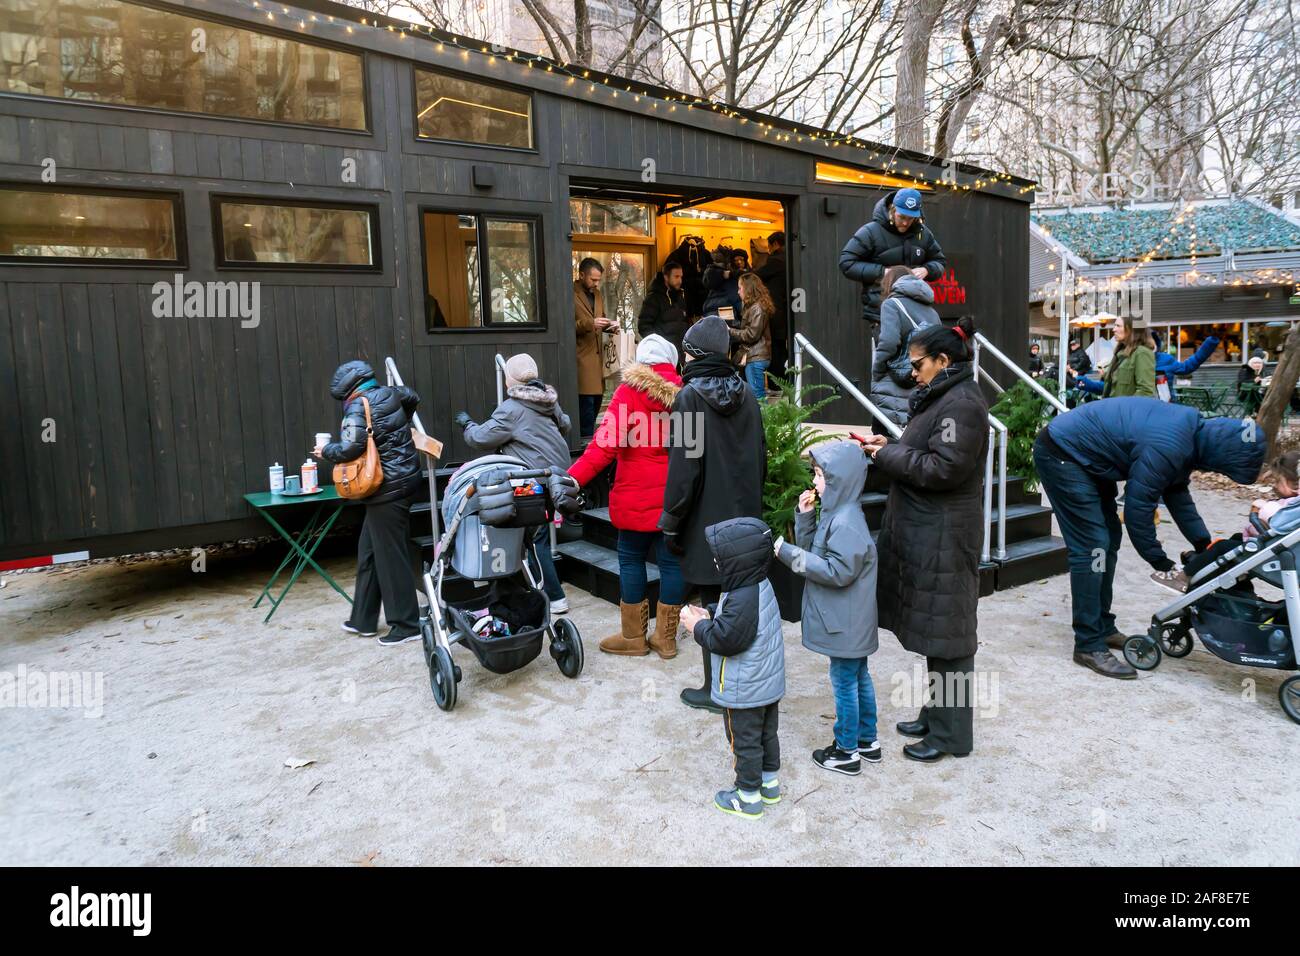 Visitors to the Madison Square Park tree lighting in New York on Thursday, December 5, 2019 enjoy the hospitality of hot chocolate from Fjällräven in their tiny house branding event. The outdoor equipment manufacturer sponsored the tree lighting and is owned by Fenix Outdoor which owns other brands including Royal Robbins. (© Richard B. Levine) Stock Photo